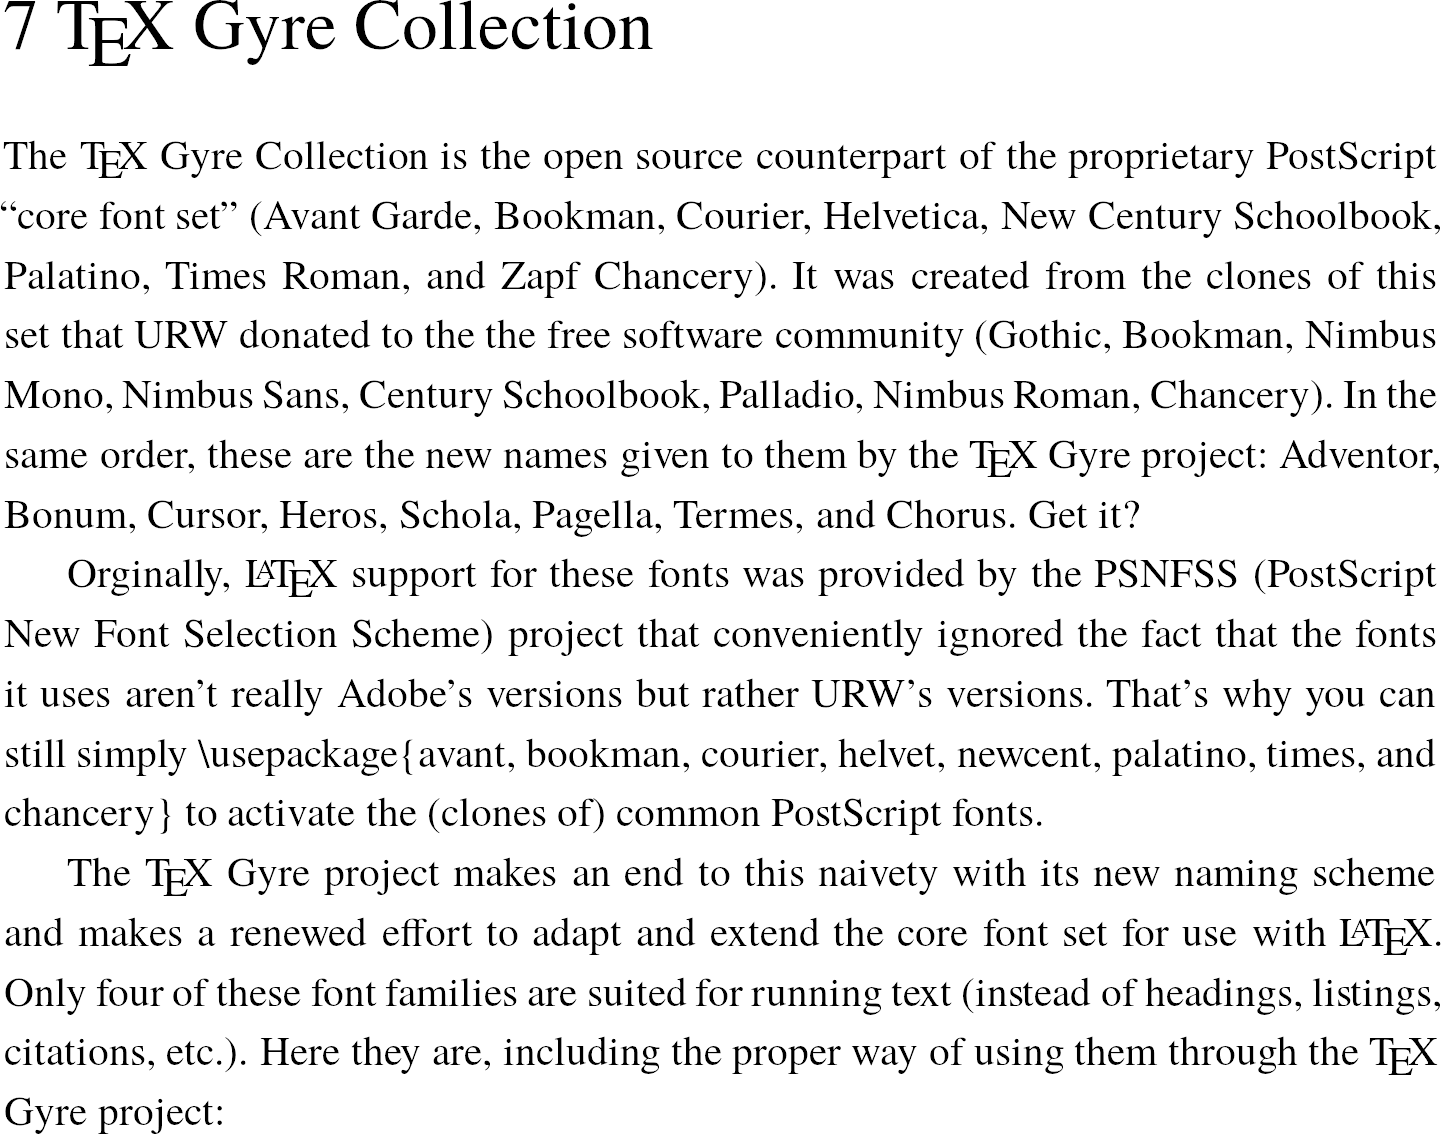 7 TeX Gyre Collection